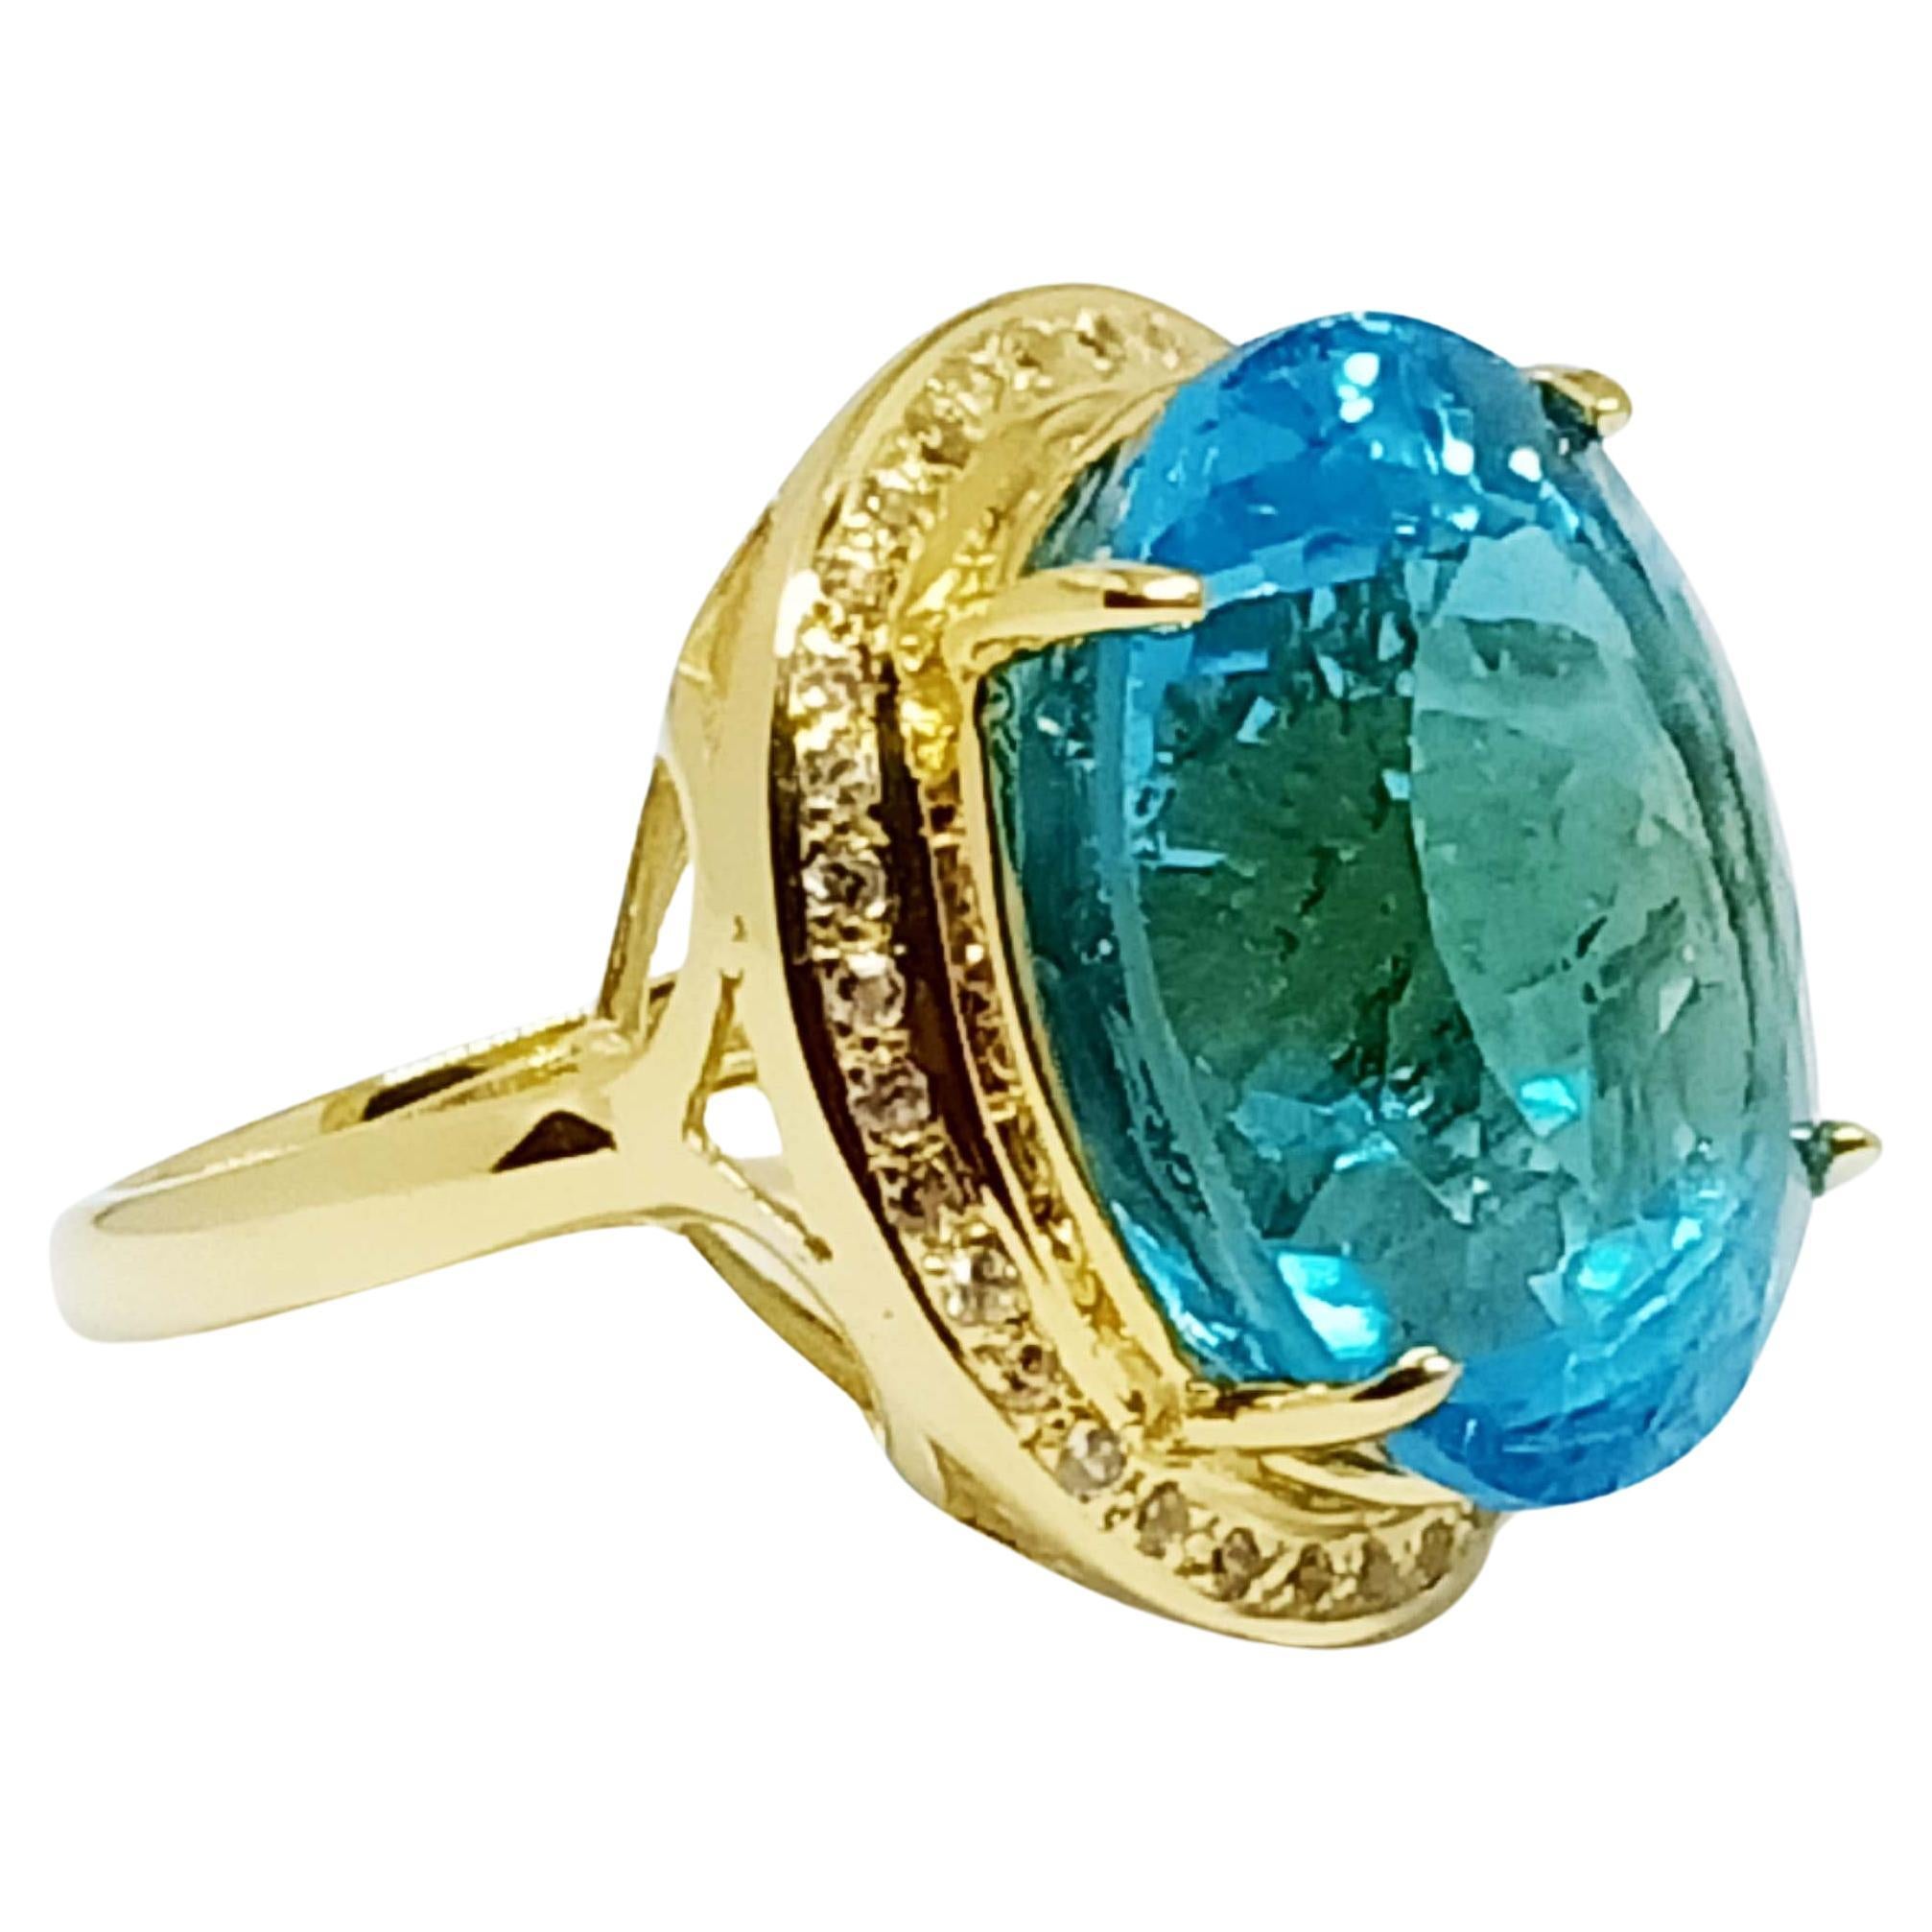 25.19 cts Swiss BlueTopaz Sterling Silver In 18K Gold Plated